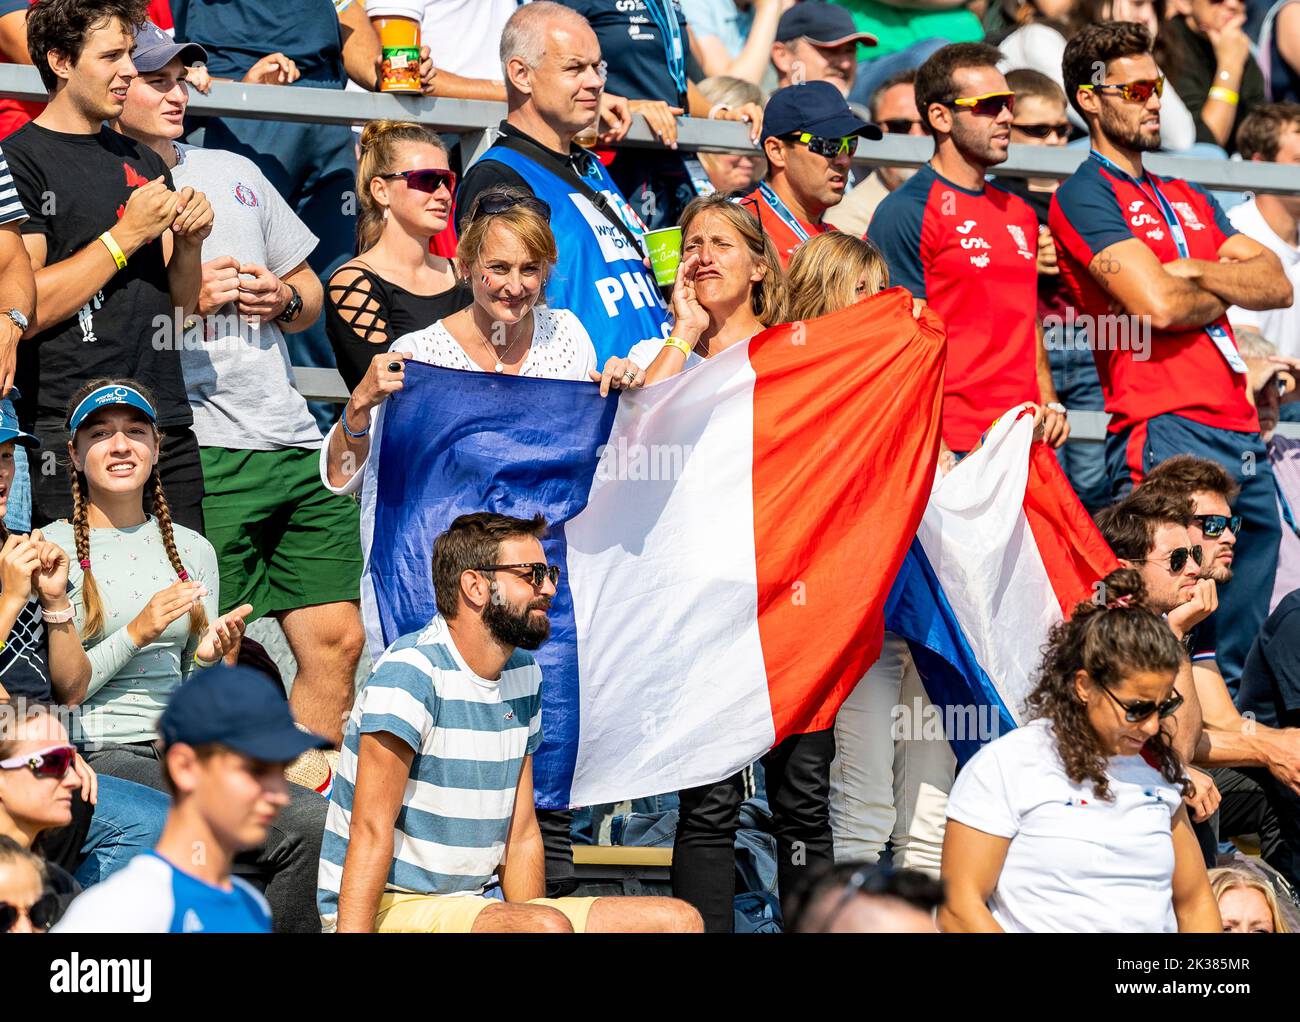 Racice, Czech Republic. 25th Sep, 2022. Fans during Day 8 of the 2022 World Rowing Championships at the Labe Arena Racice on September 25, 2022 in Racice, Czech Republic. Credit: Ondrej Hajek/CTK Photo/Alamy Live News Stock Photo